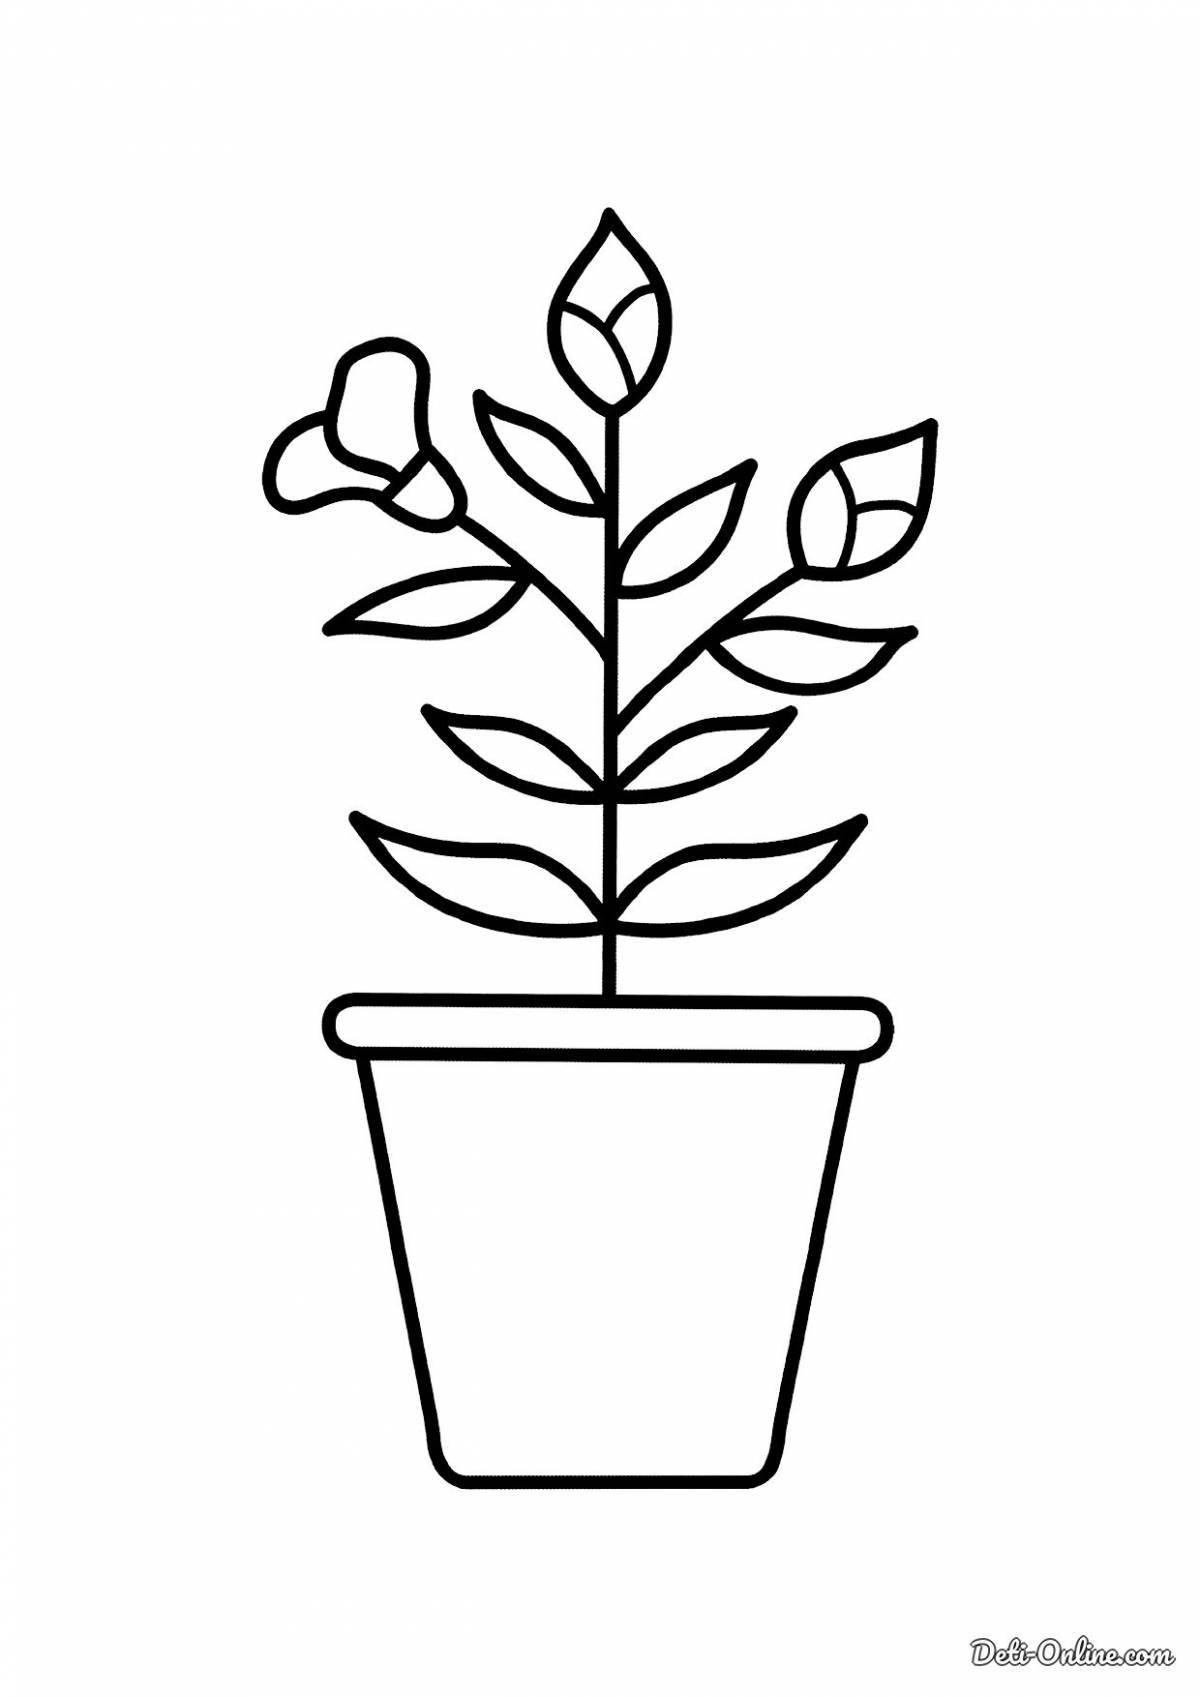 Coloring page happy flower pot for kids